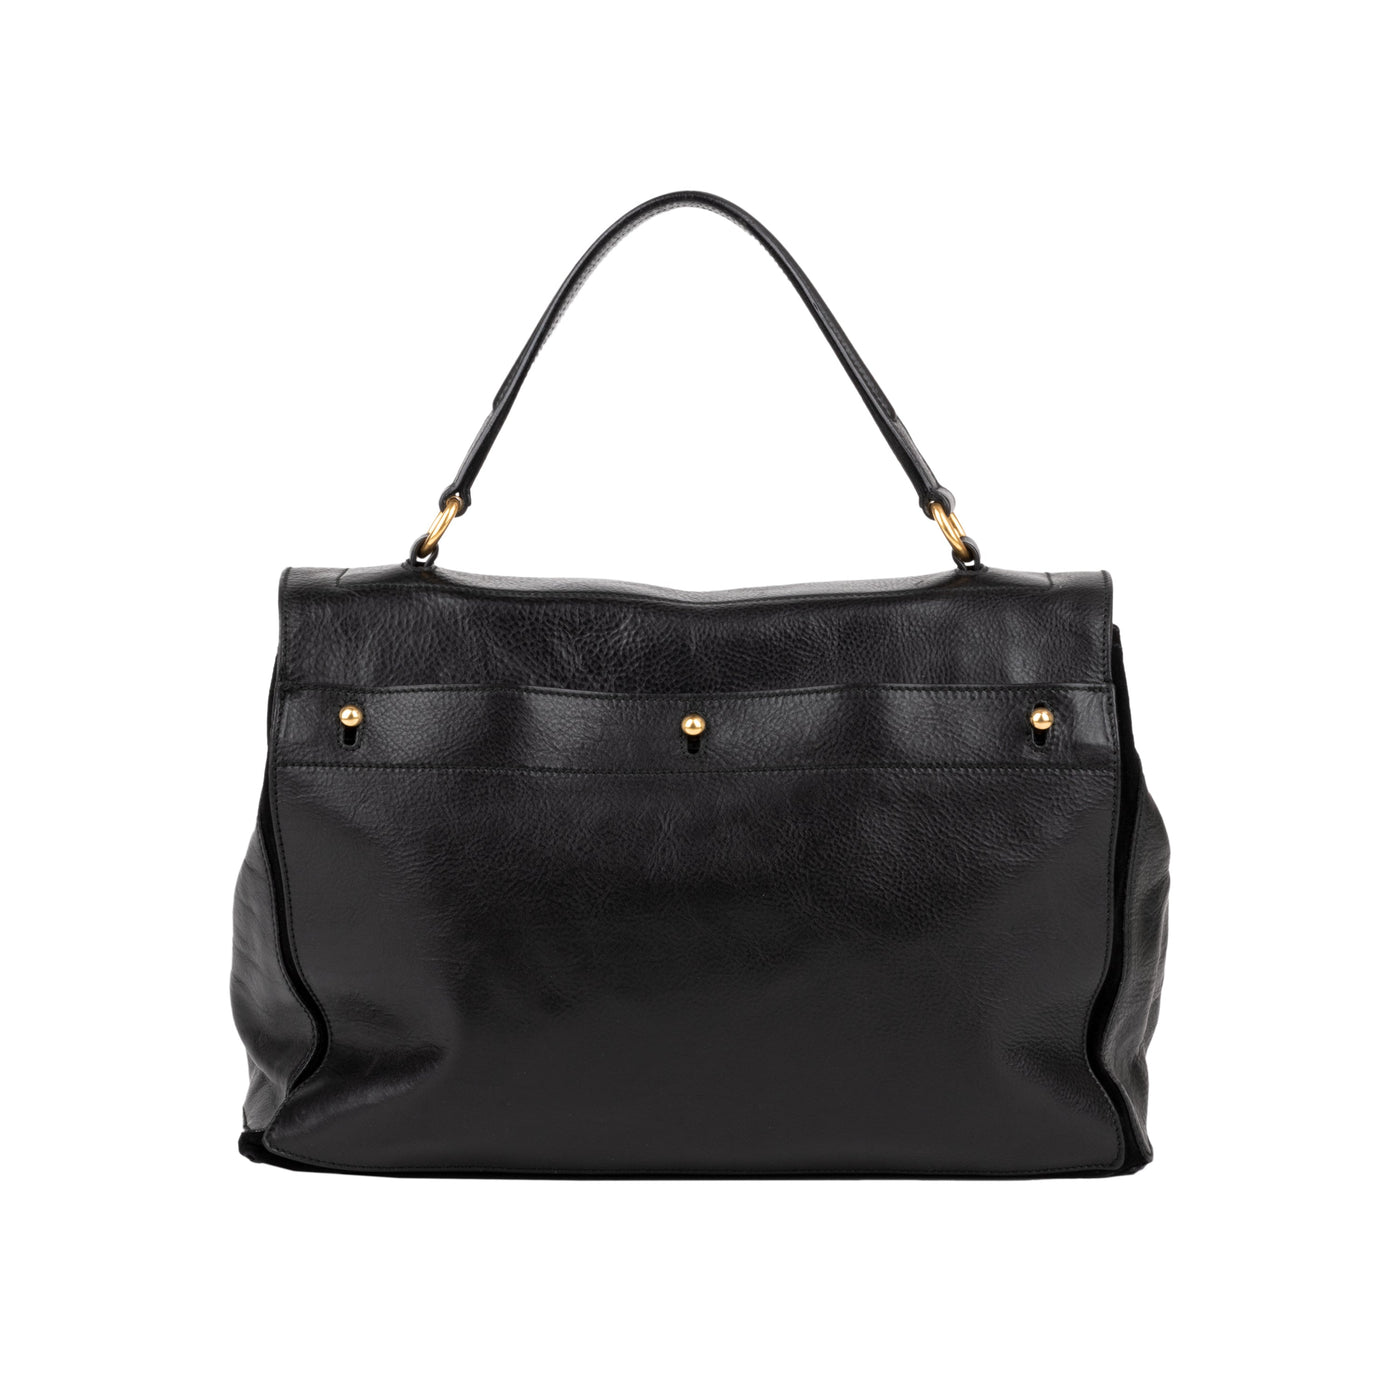 Yves Saint Laurent Muse Two bag black leather  pre-owned